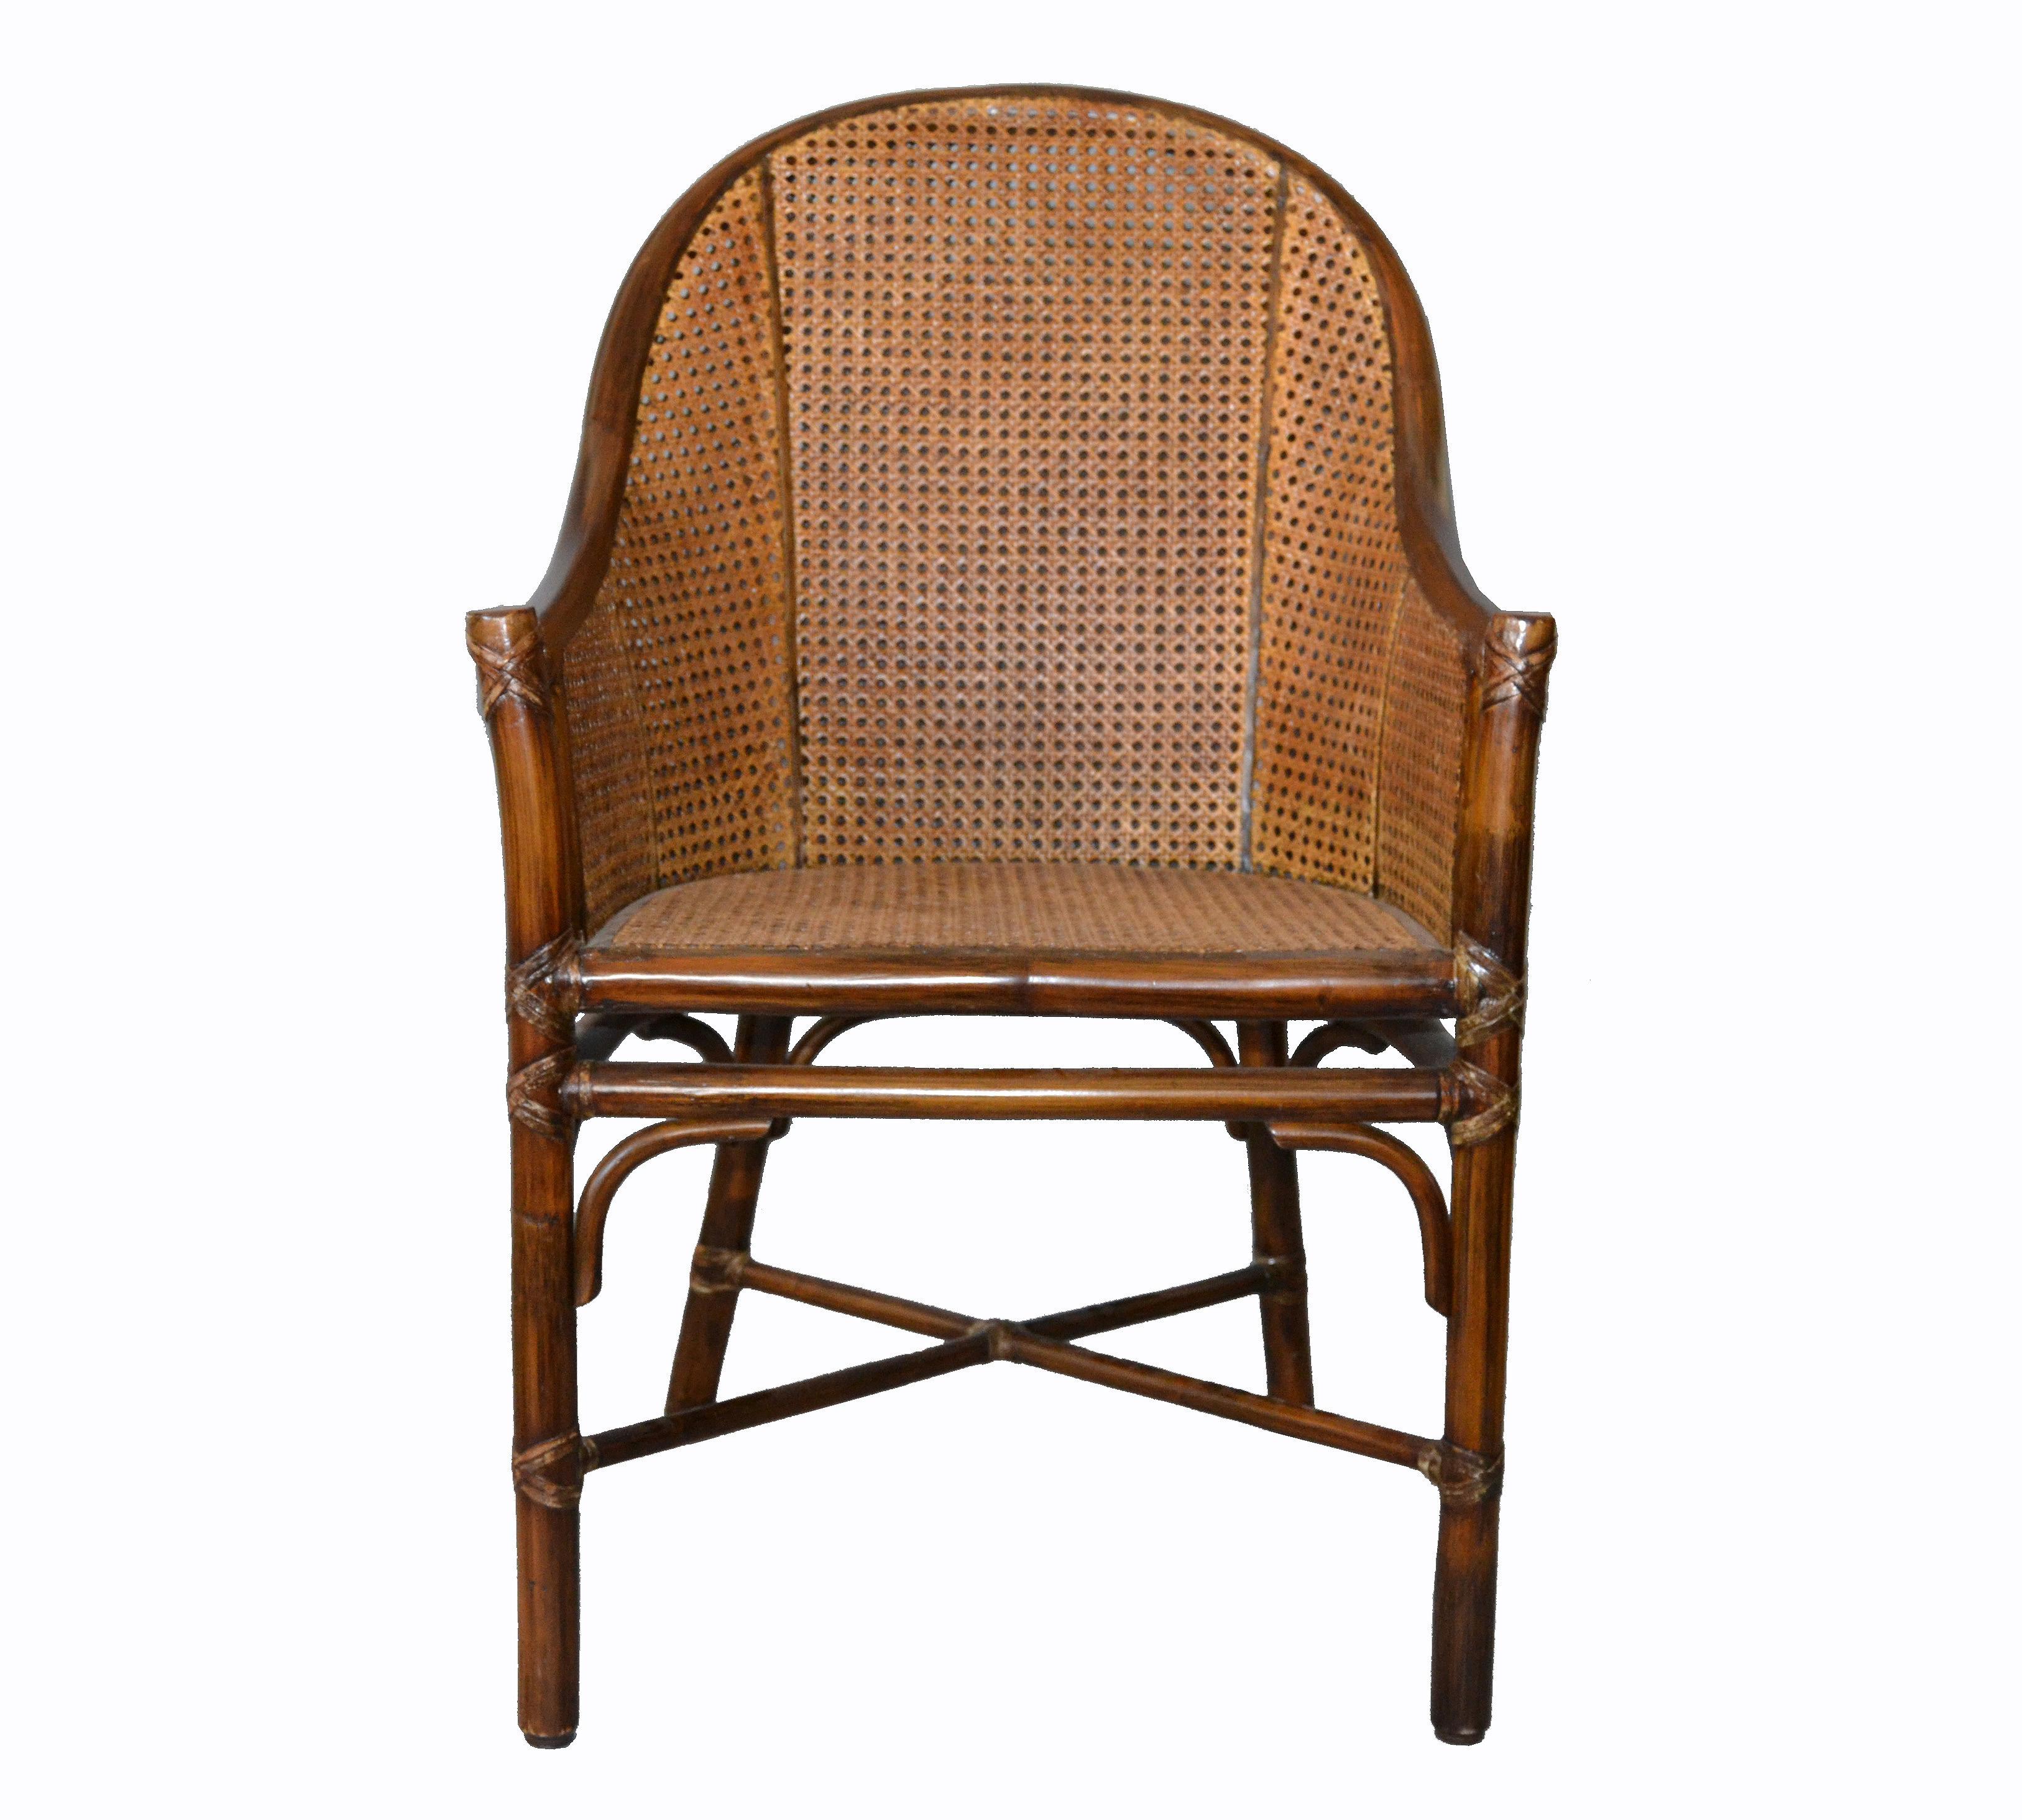 Original McGuire bamboo and handwoven cane armchair, desk chair with leather bindings.
McGuire metal tag is attached underneath.
Measures: Arm height 24 inches.